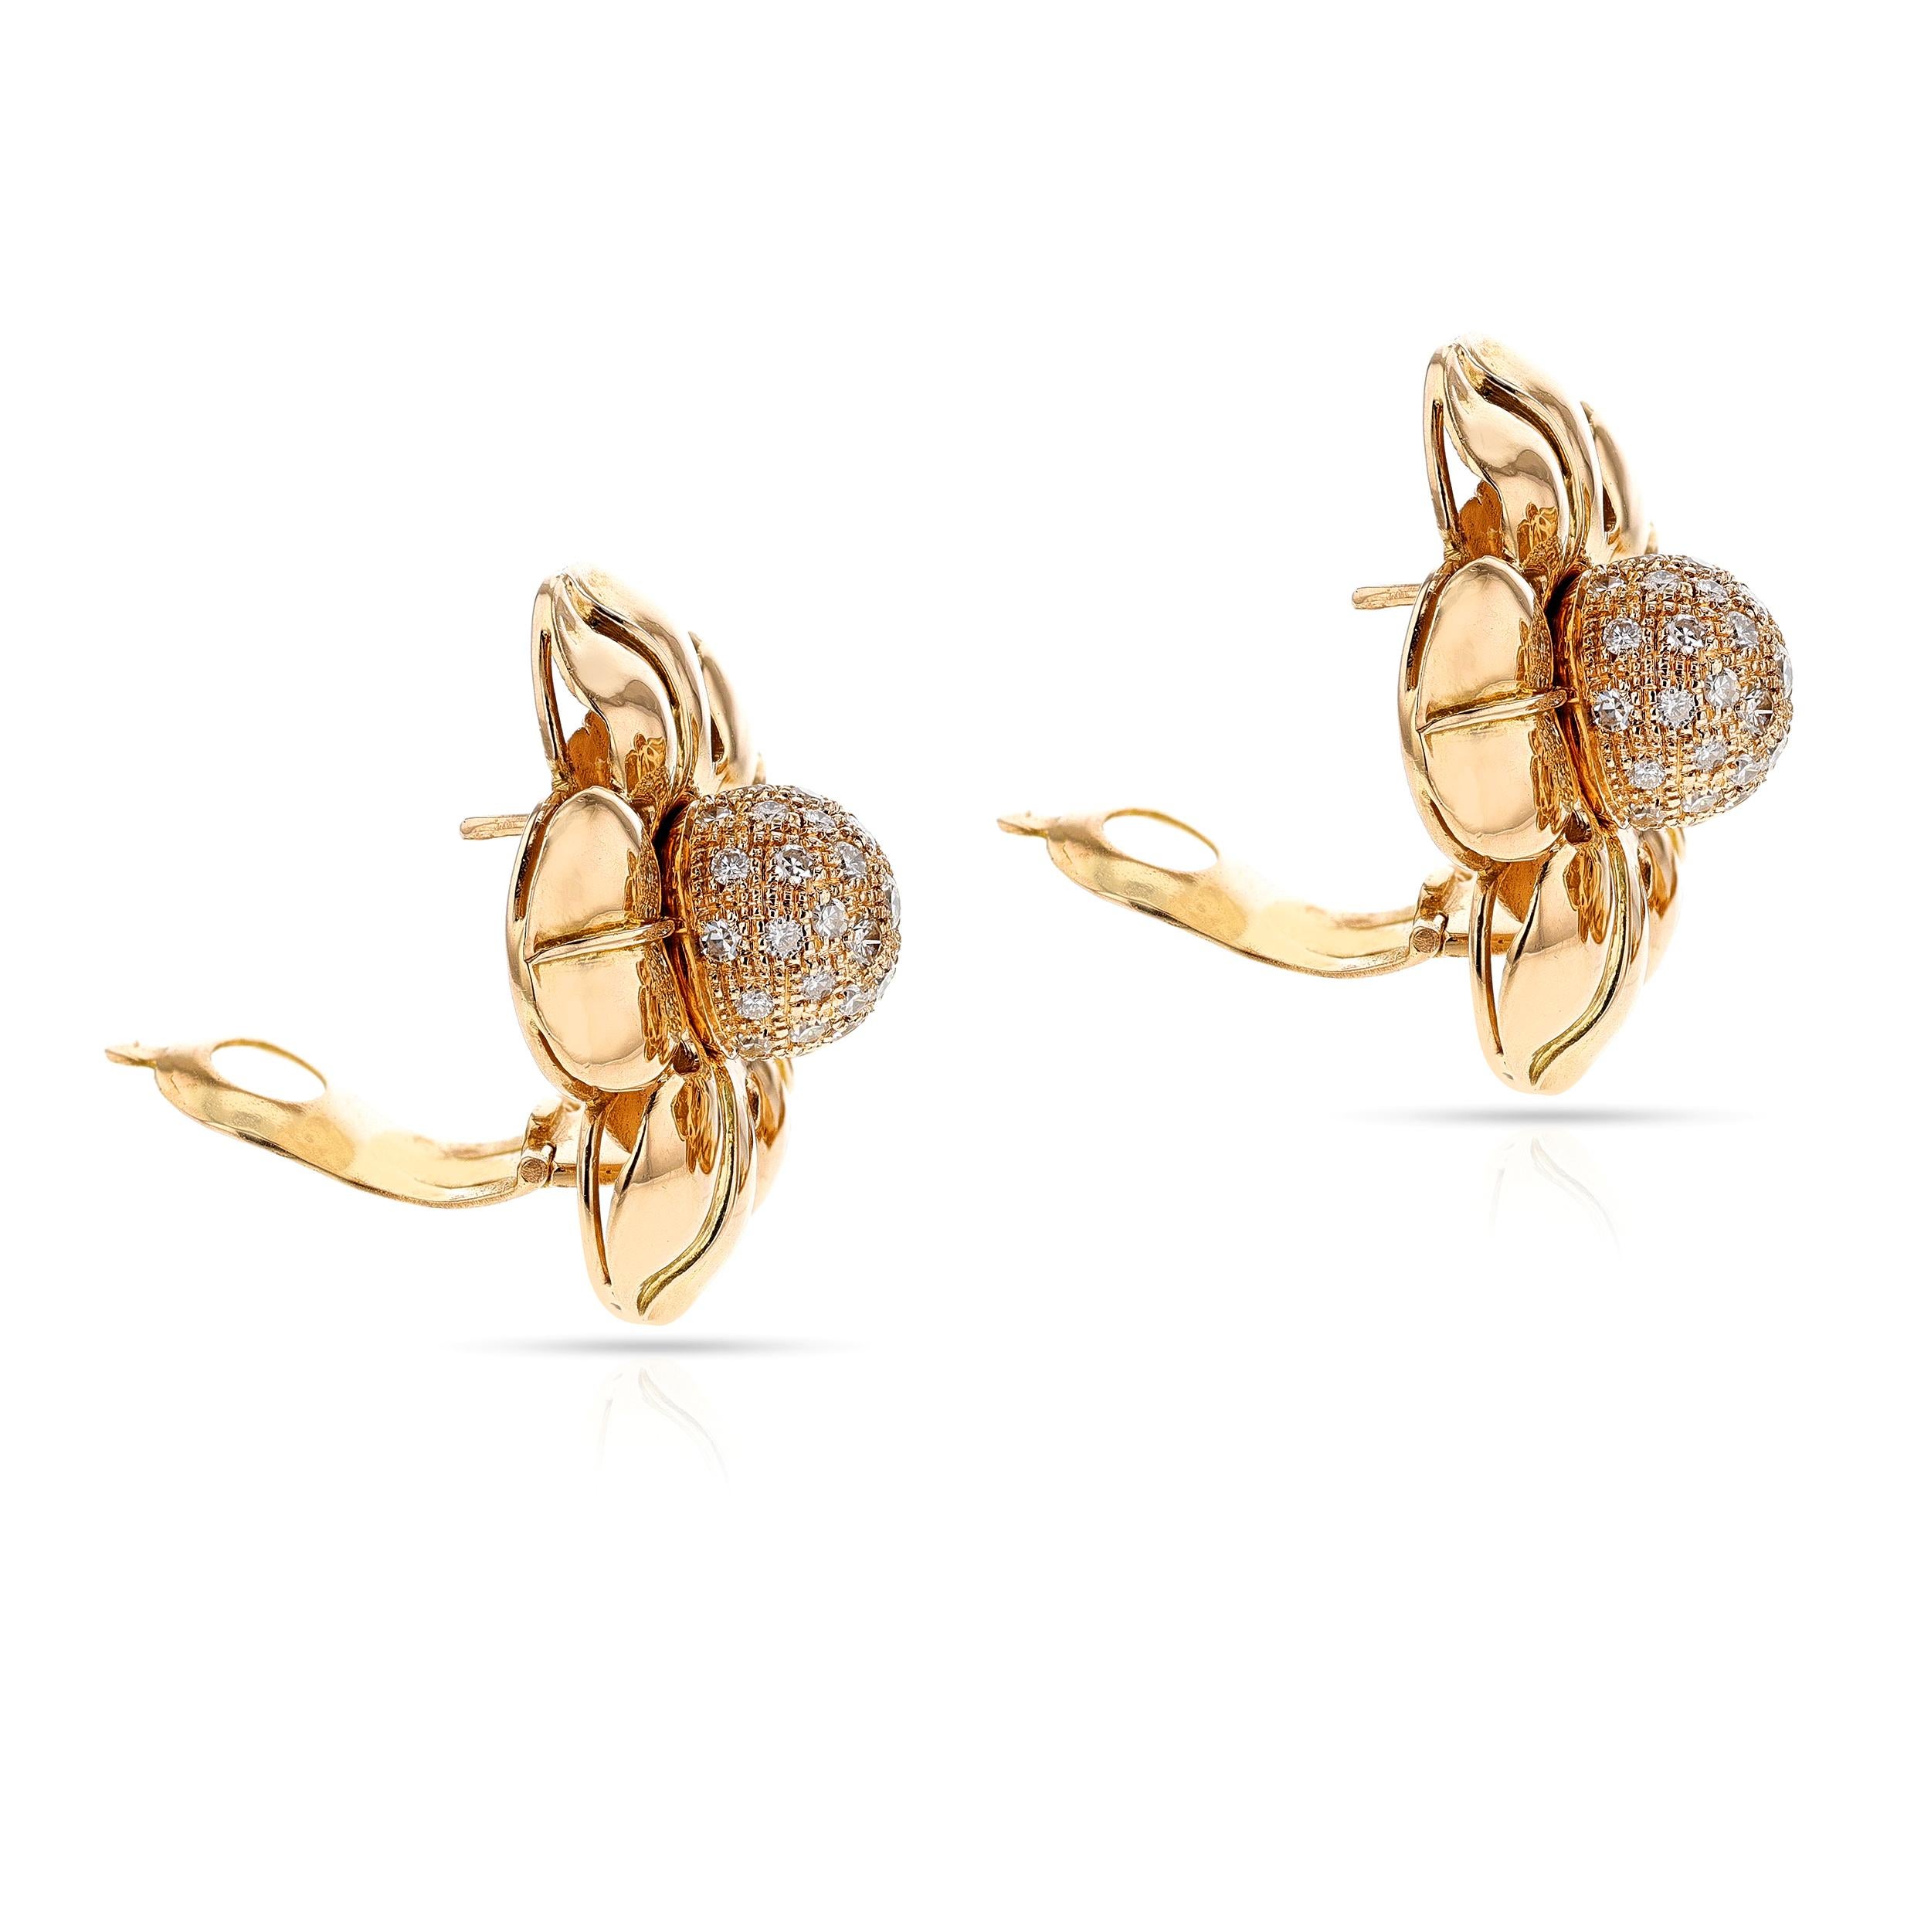 Round Cut Pery et Fils Van Cleef & Arpels Floral Earrings with Gold and Diamonds, 18k For Sale